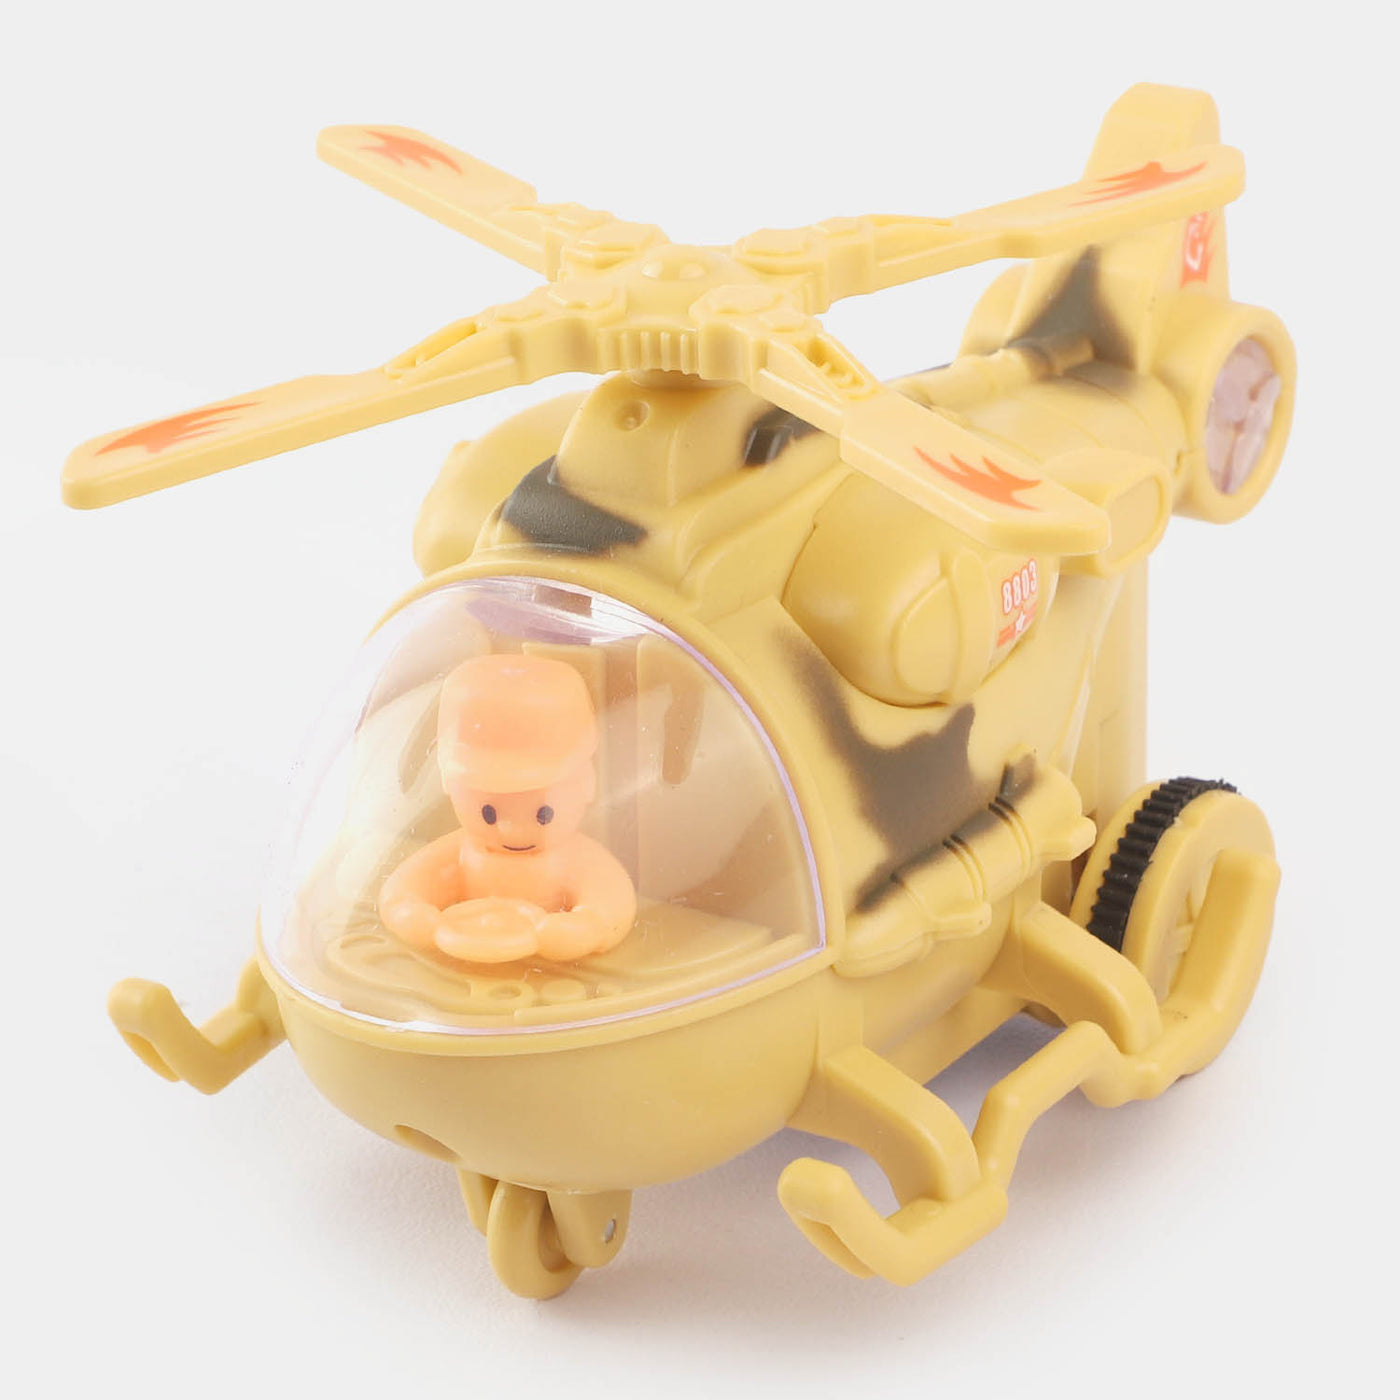 Helicopter Friction Toy For Kids